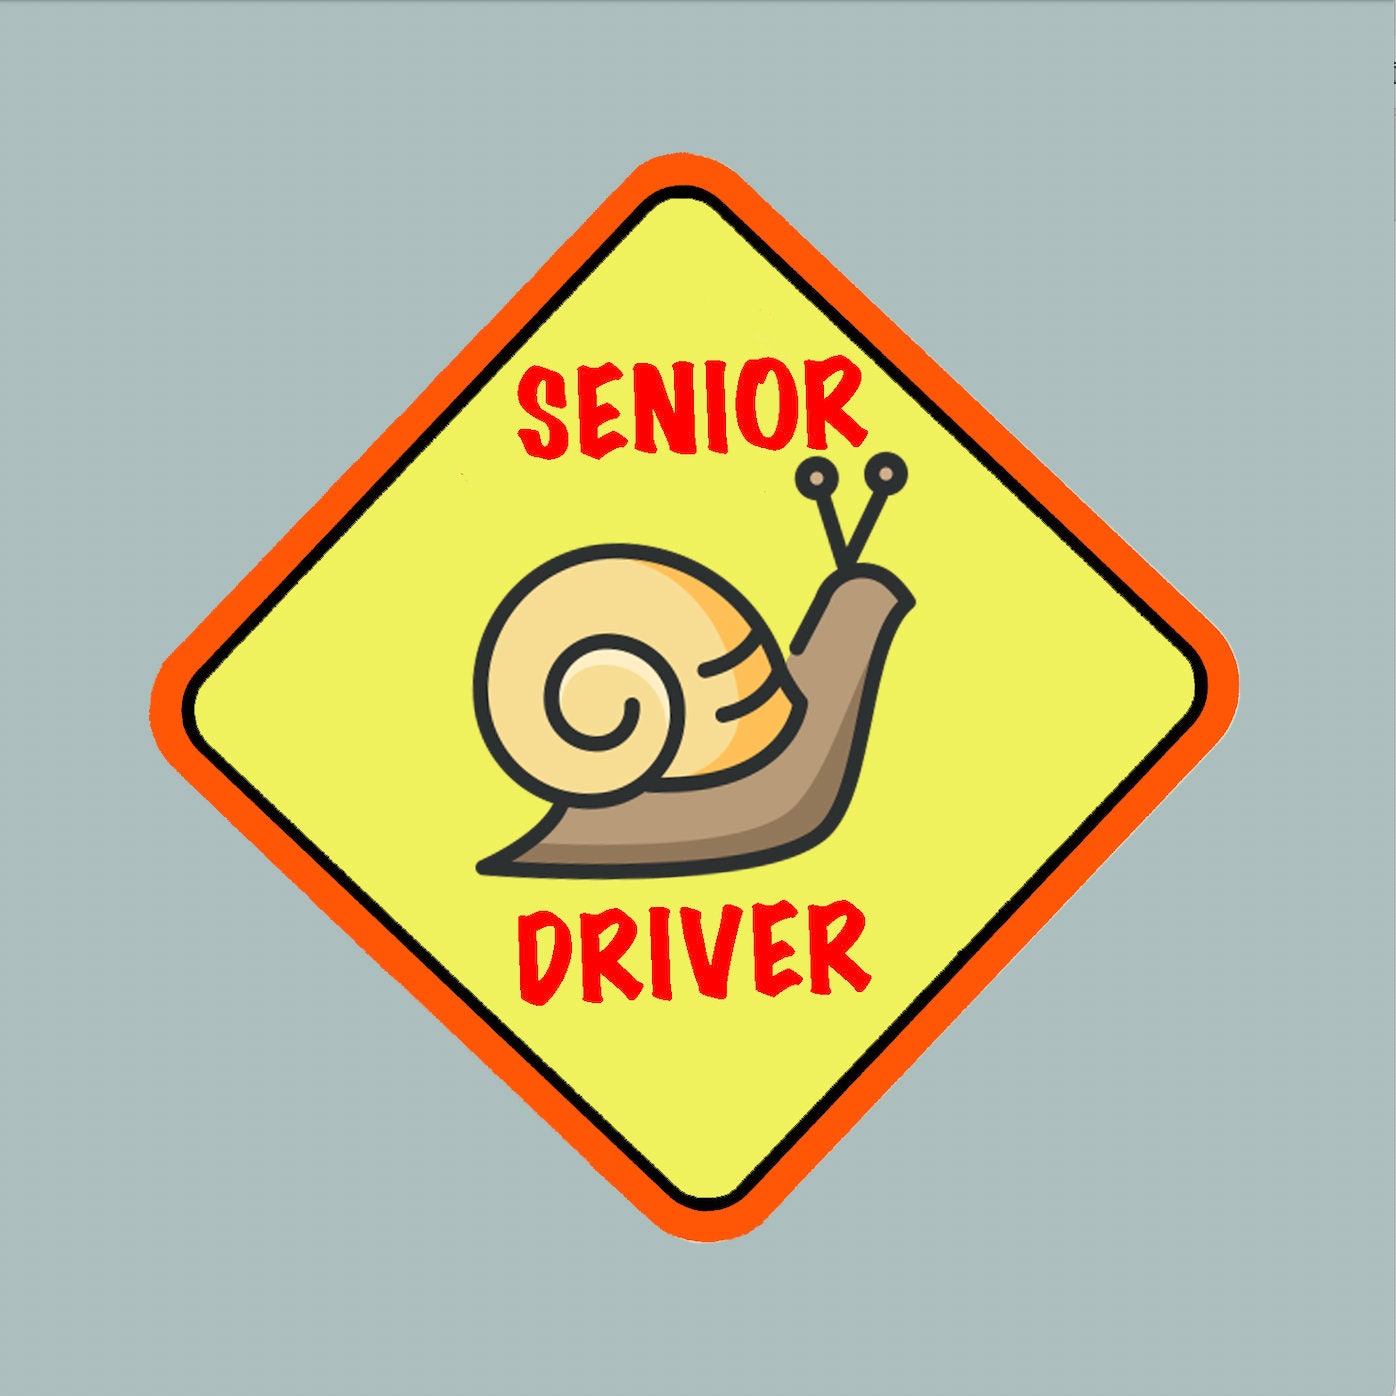 Rio Salto Funny Elderly Driver Magnet and New Driver Magnet for Car Old  People Gag Gifts Please Be Patient Yellow Elderly Car Magnet Sign Magnetic  Bumper Sticker for Grandma and Grandpa Prank 